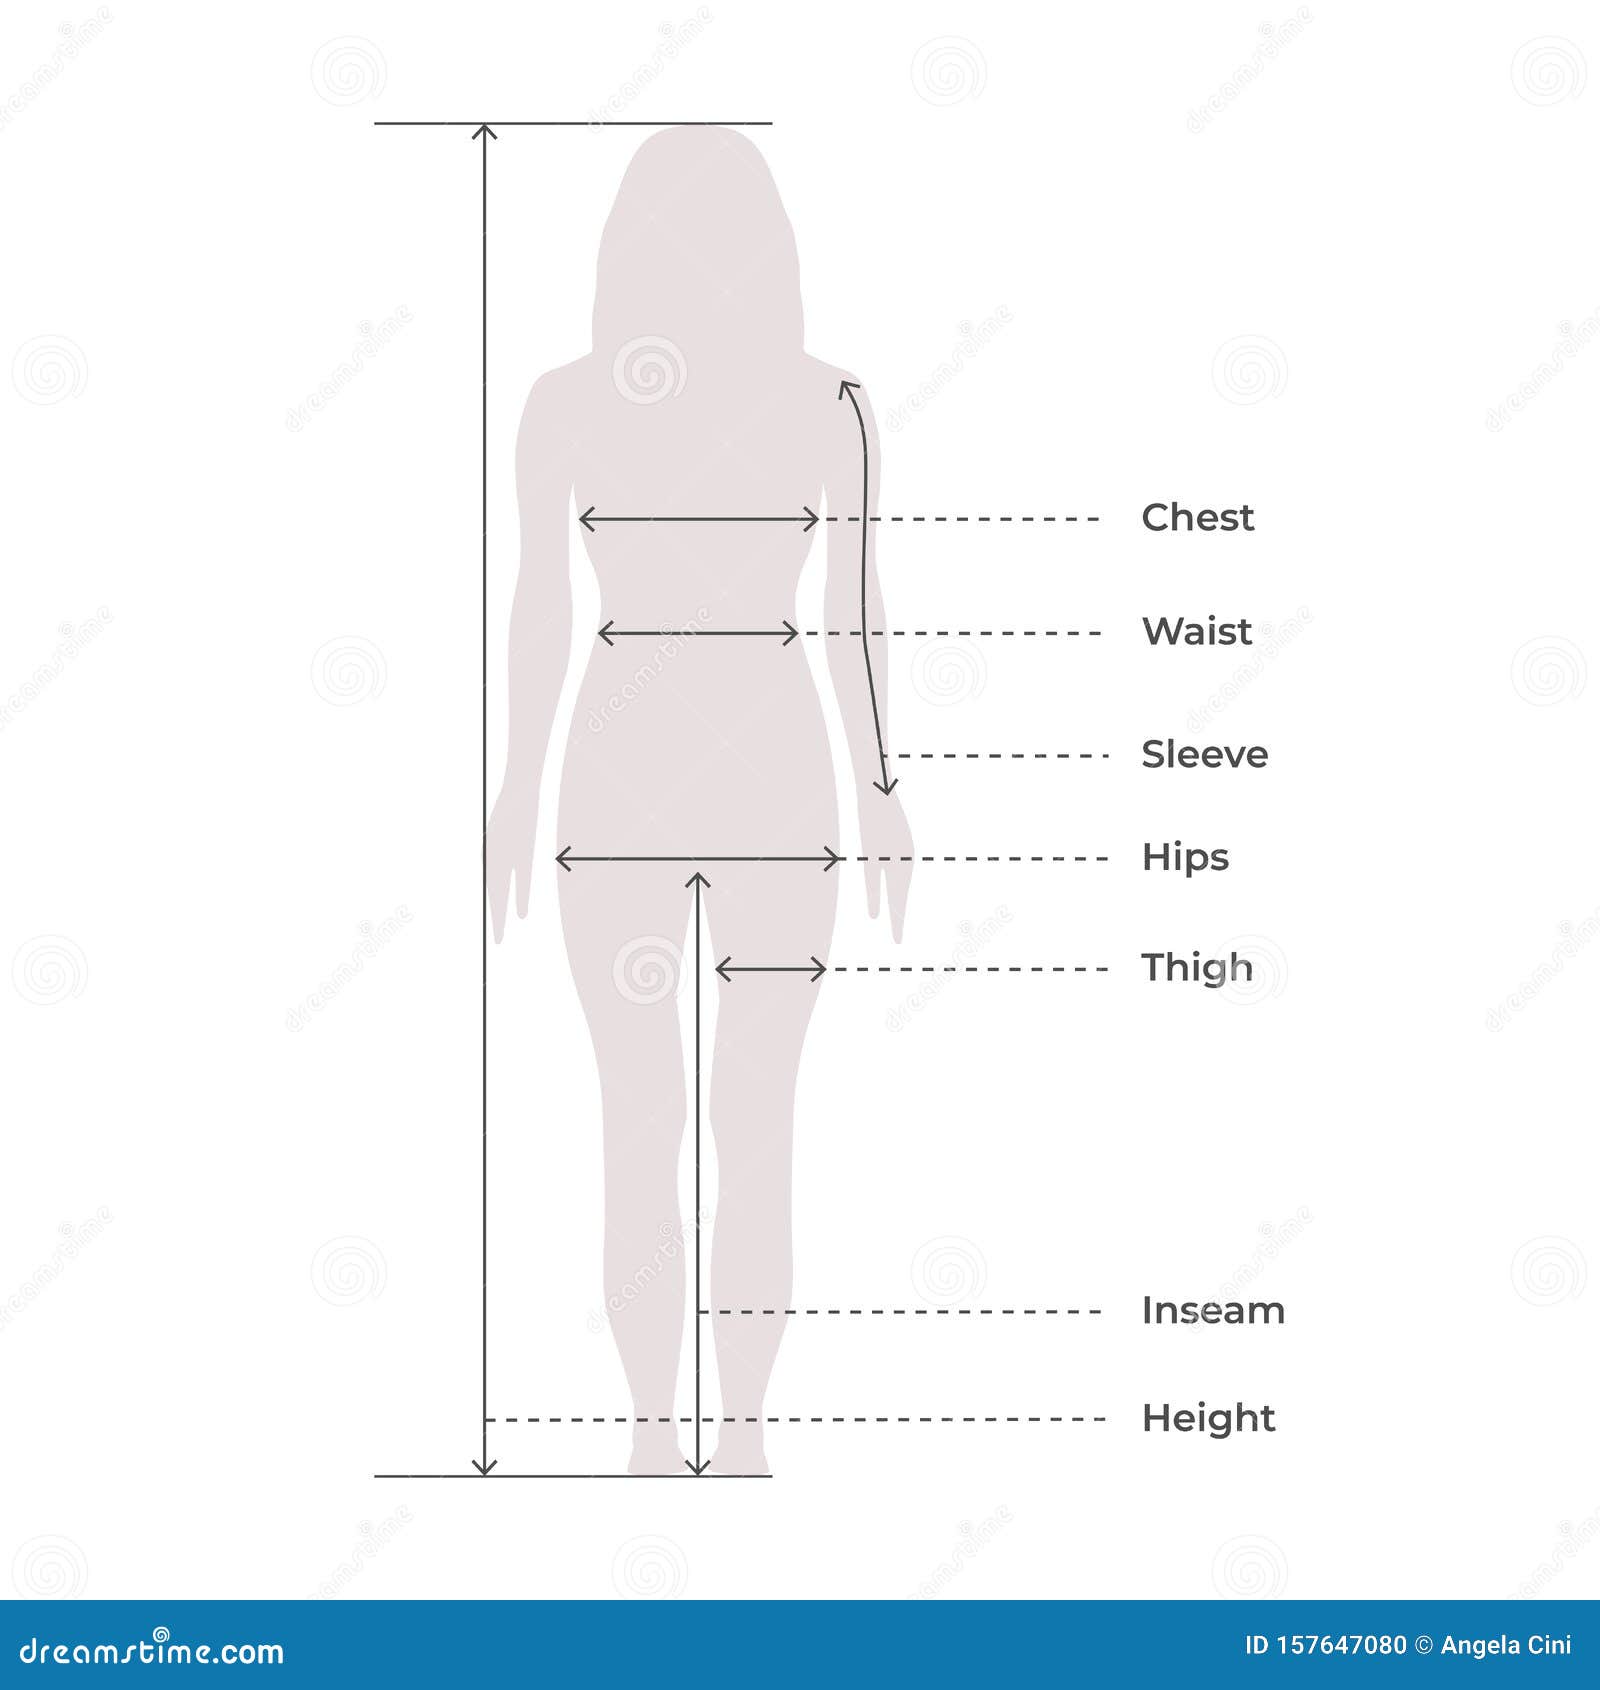 body-download-female-body-measurement-chart-for-sewing-pdf-pictures